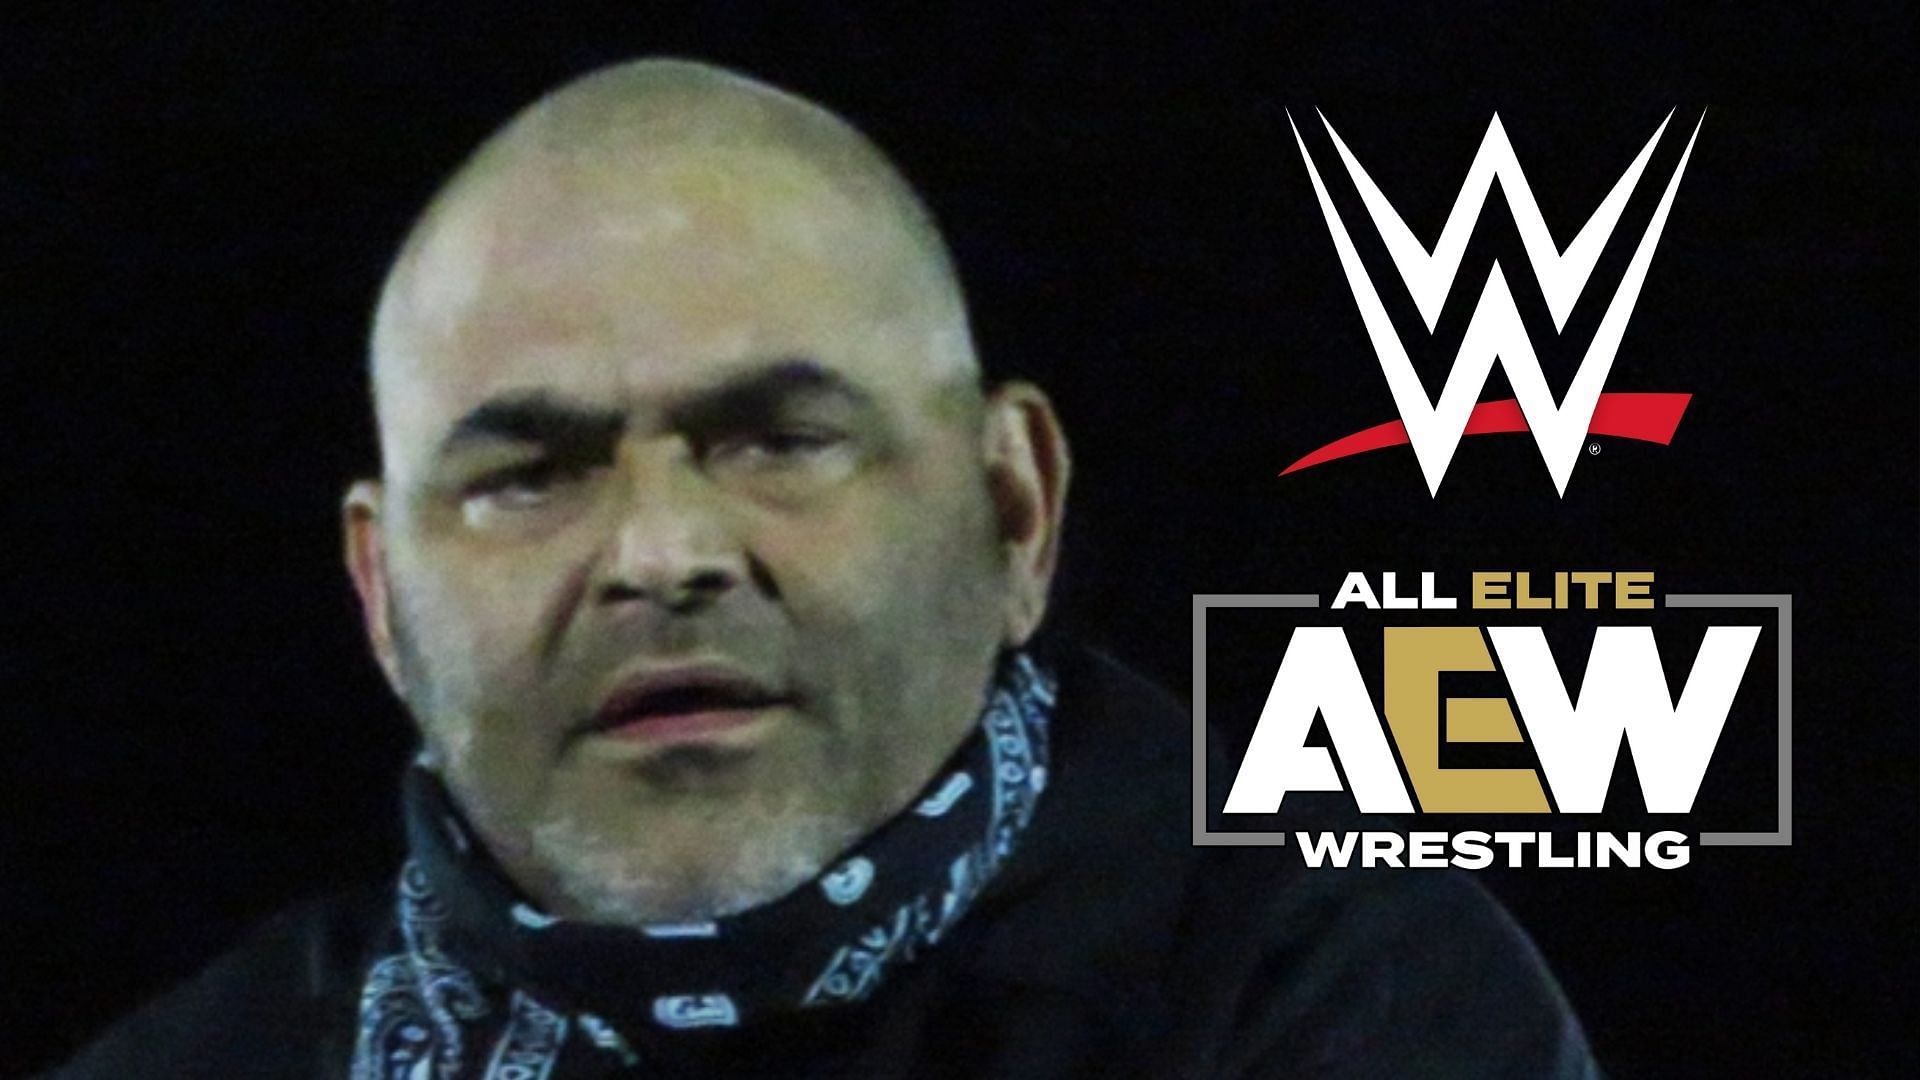 Konnan has some criticism for Tony Khan and AEW.